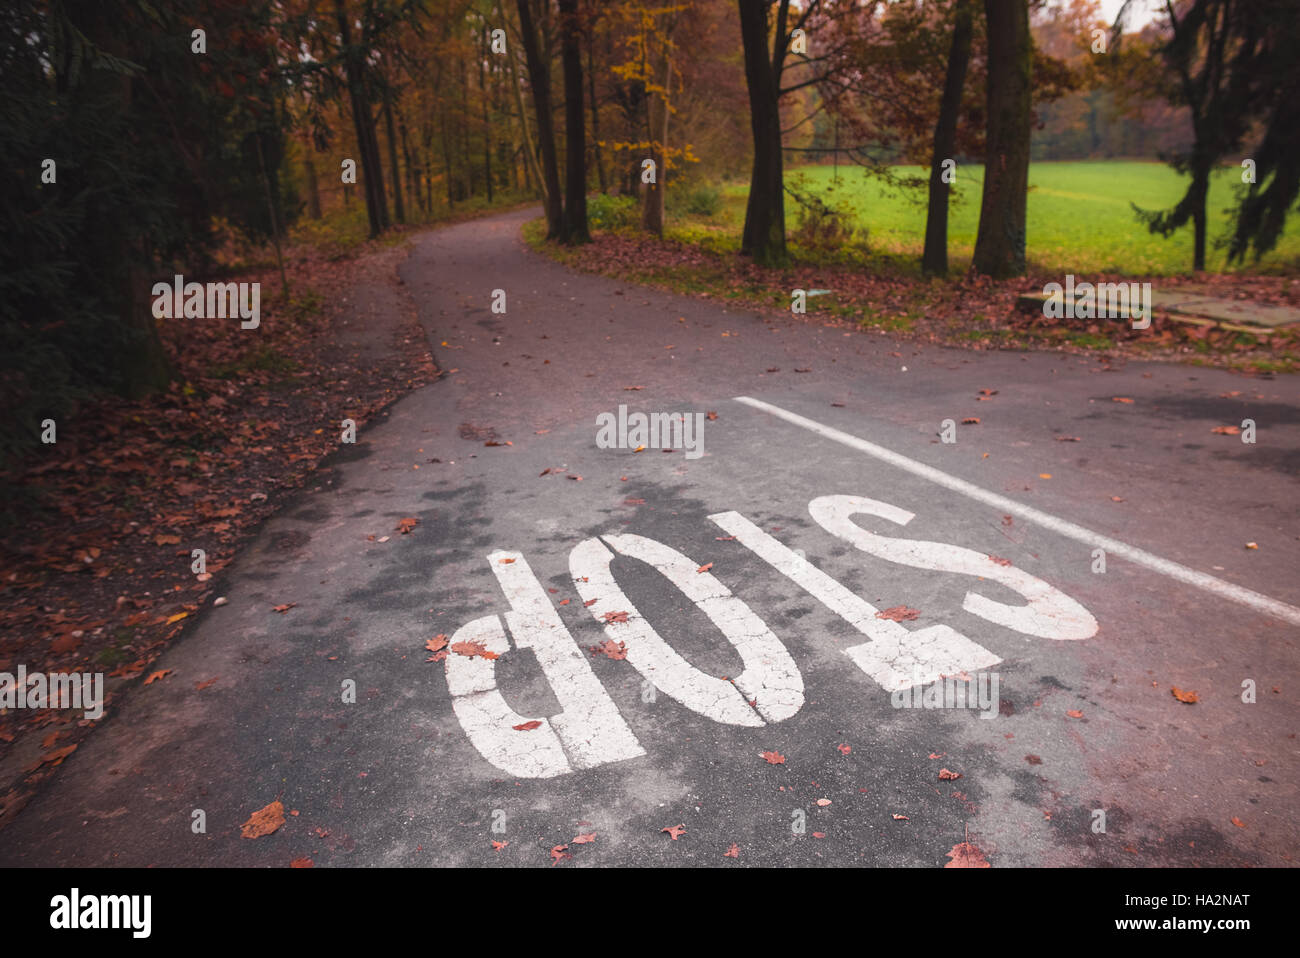 Stop sign painted on a road in a park at autumn Stock Photo